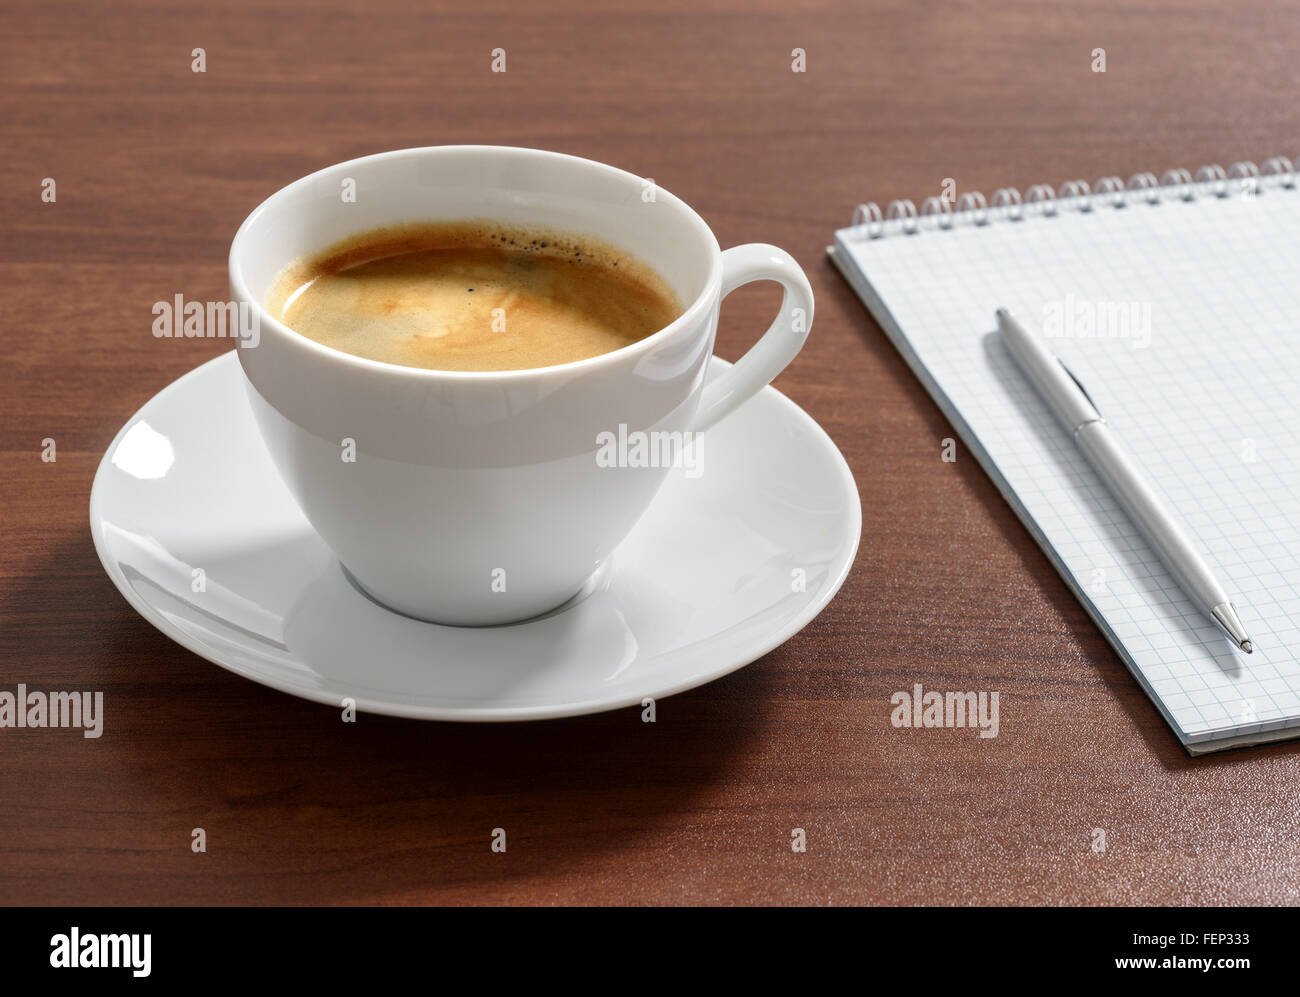 Cup of aromatic coffee americano with notepad and pen. Stock Photo